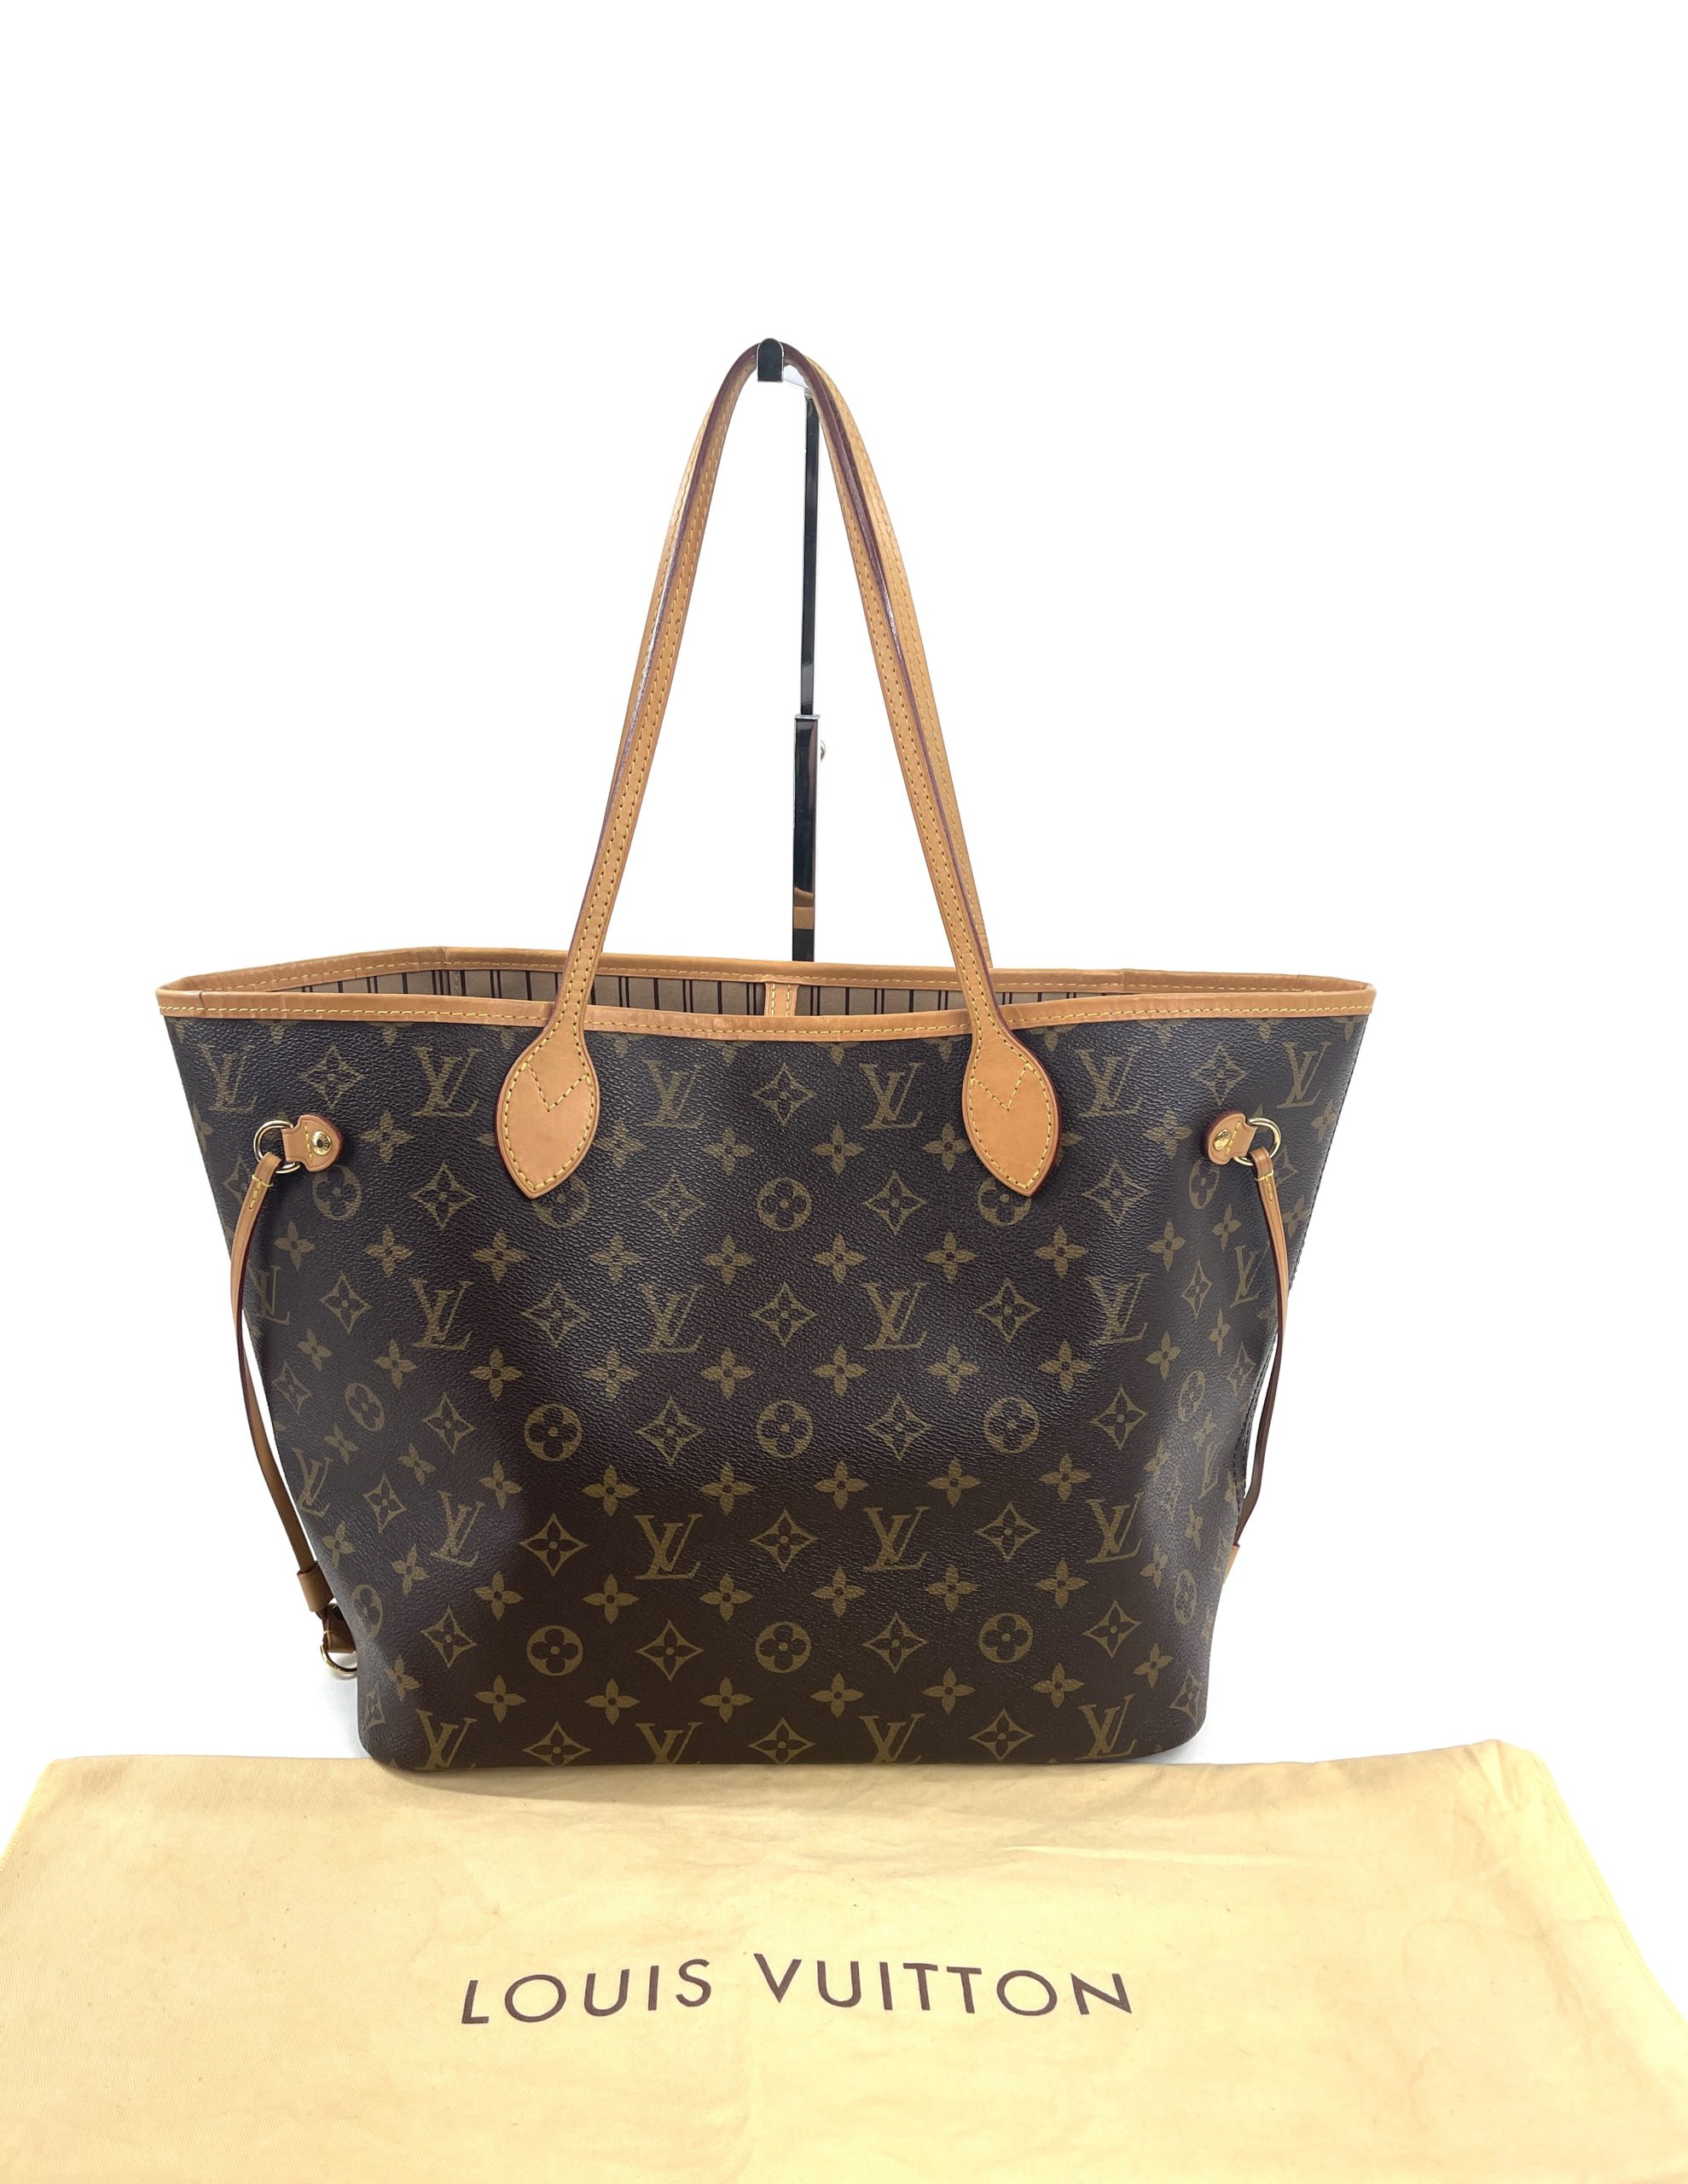 LOUIS VUITTON TURENNE MM REVIEW AND FIRST IMPRESSION 